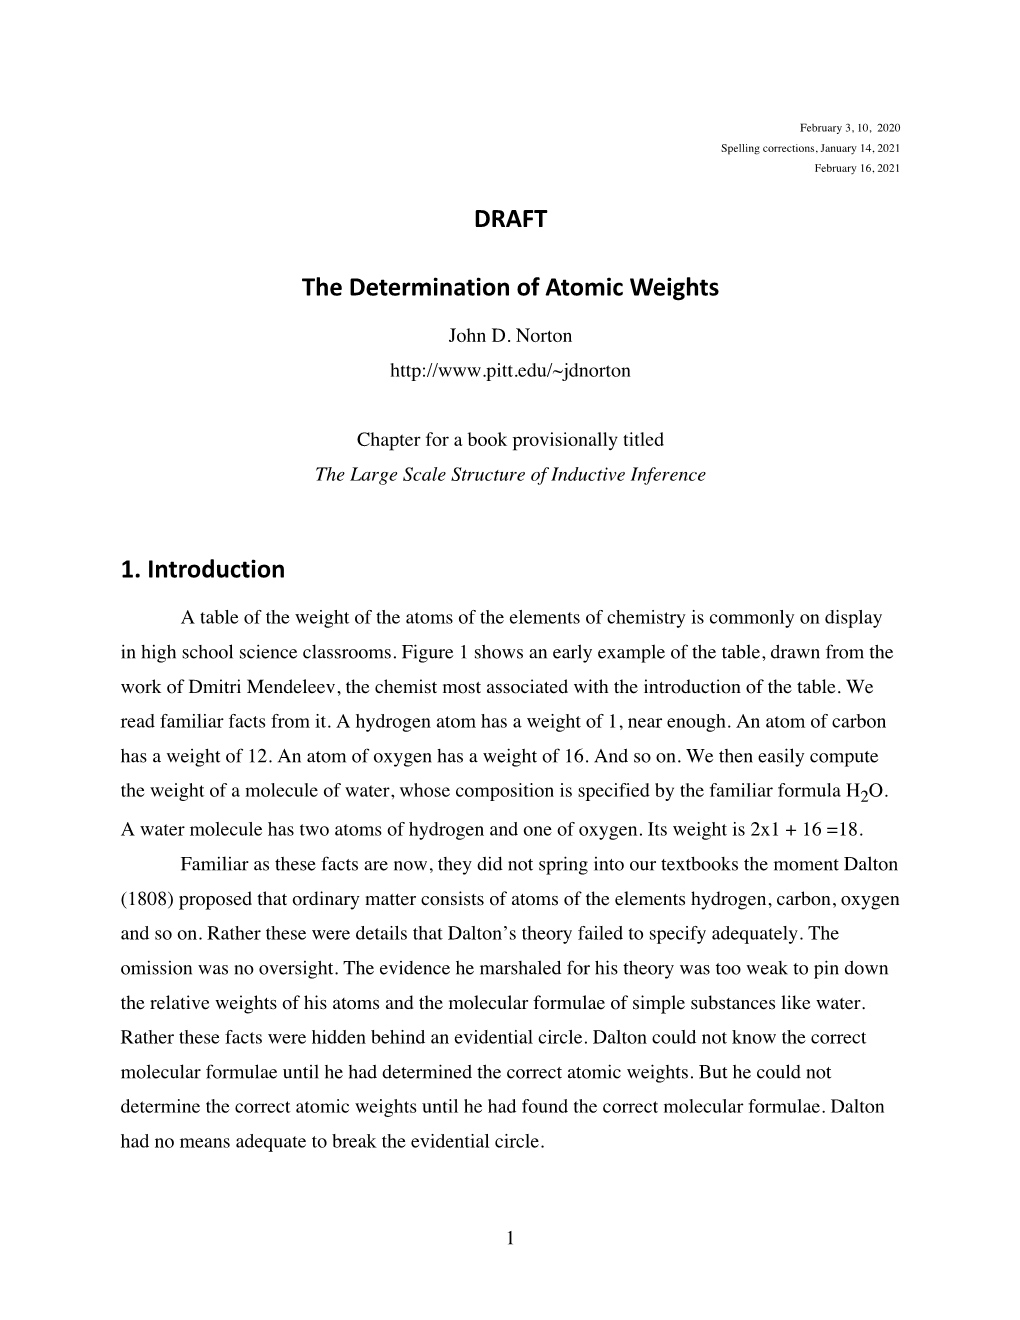 DRAFT the Determination of Atomic Weights 1. Introduction